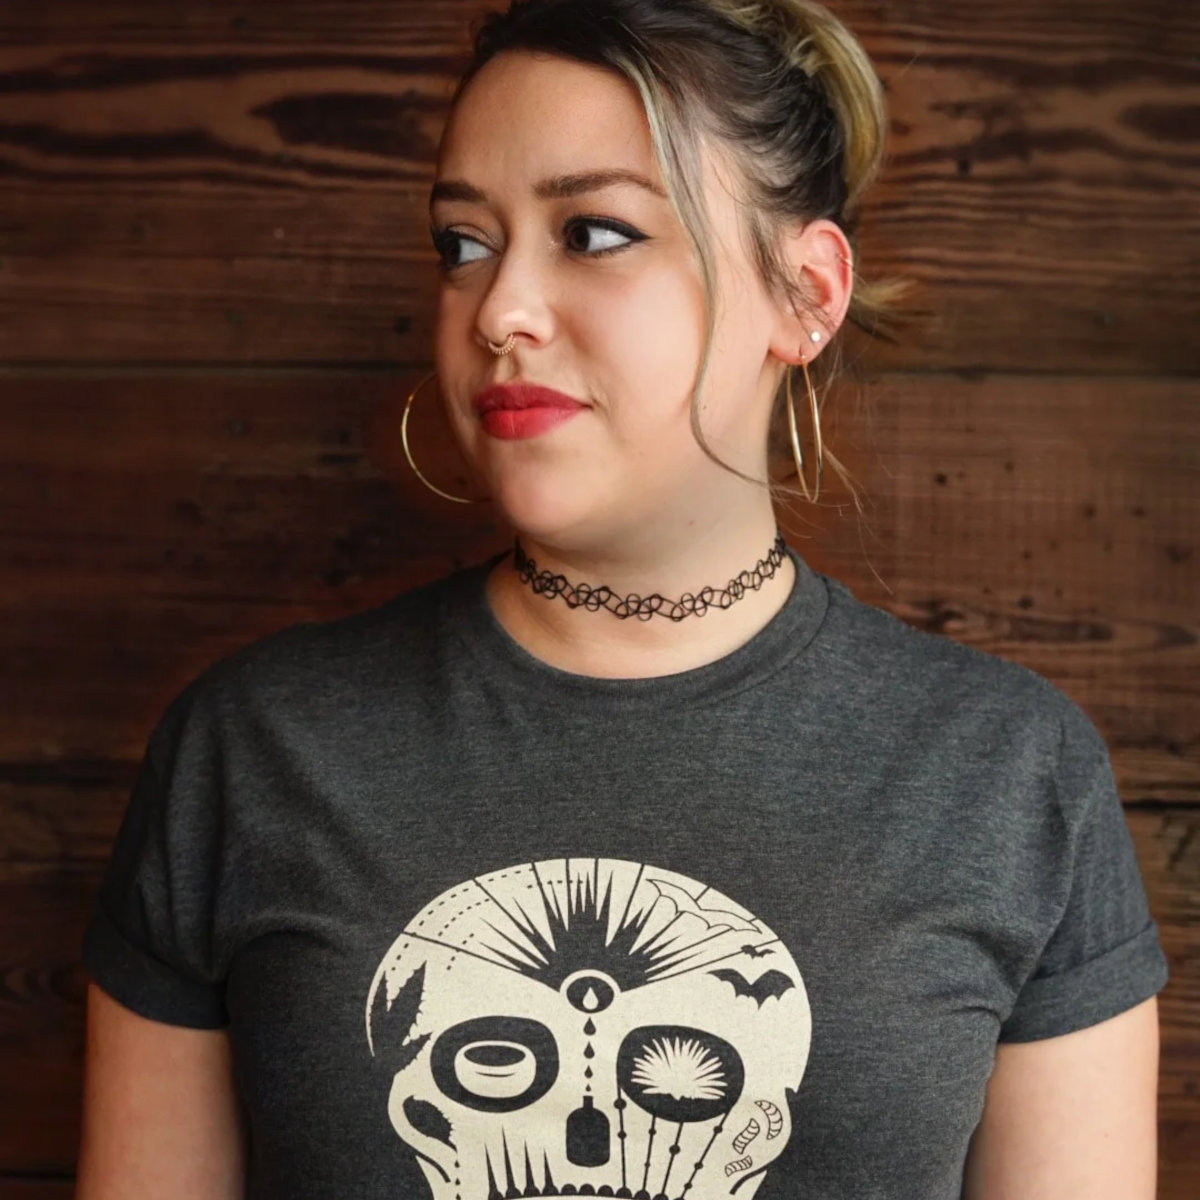 A girl is wearing a t-shirt with a skull print.